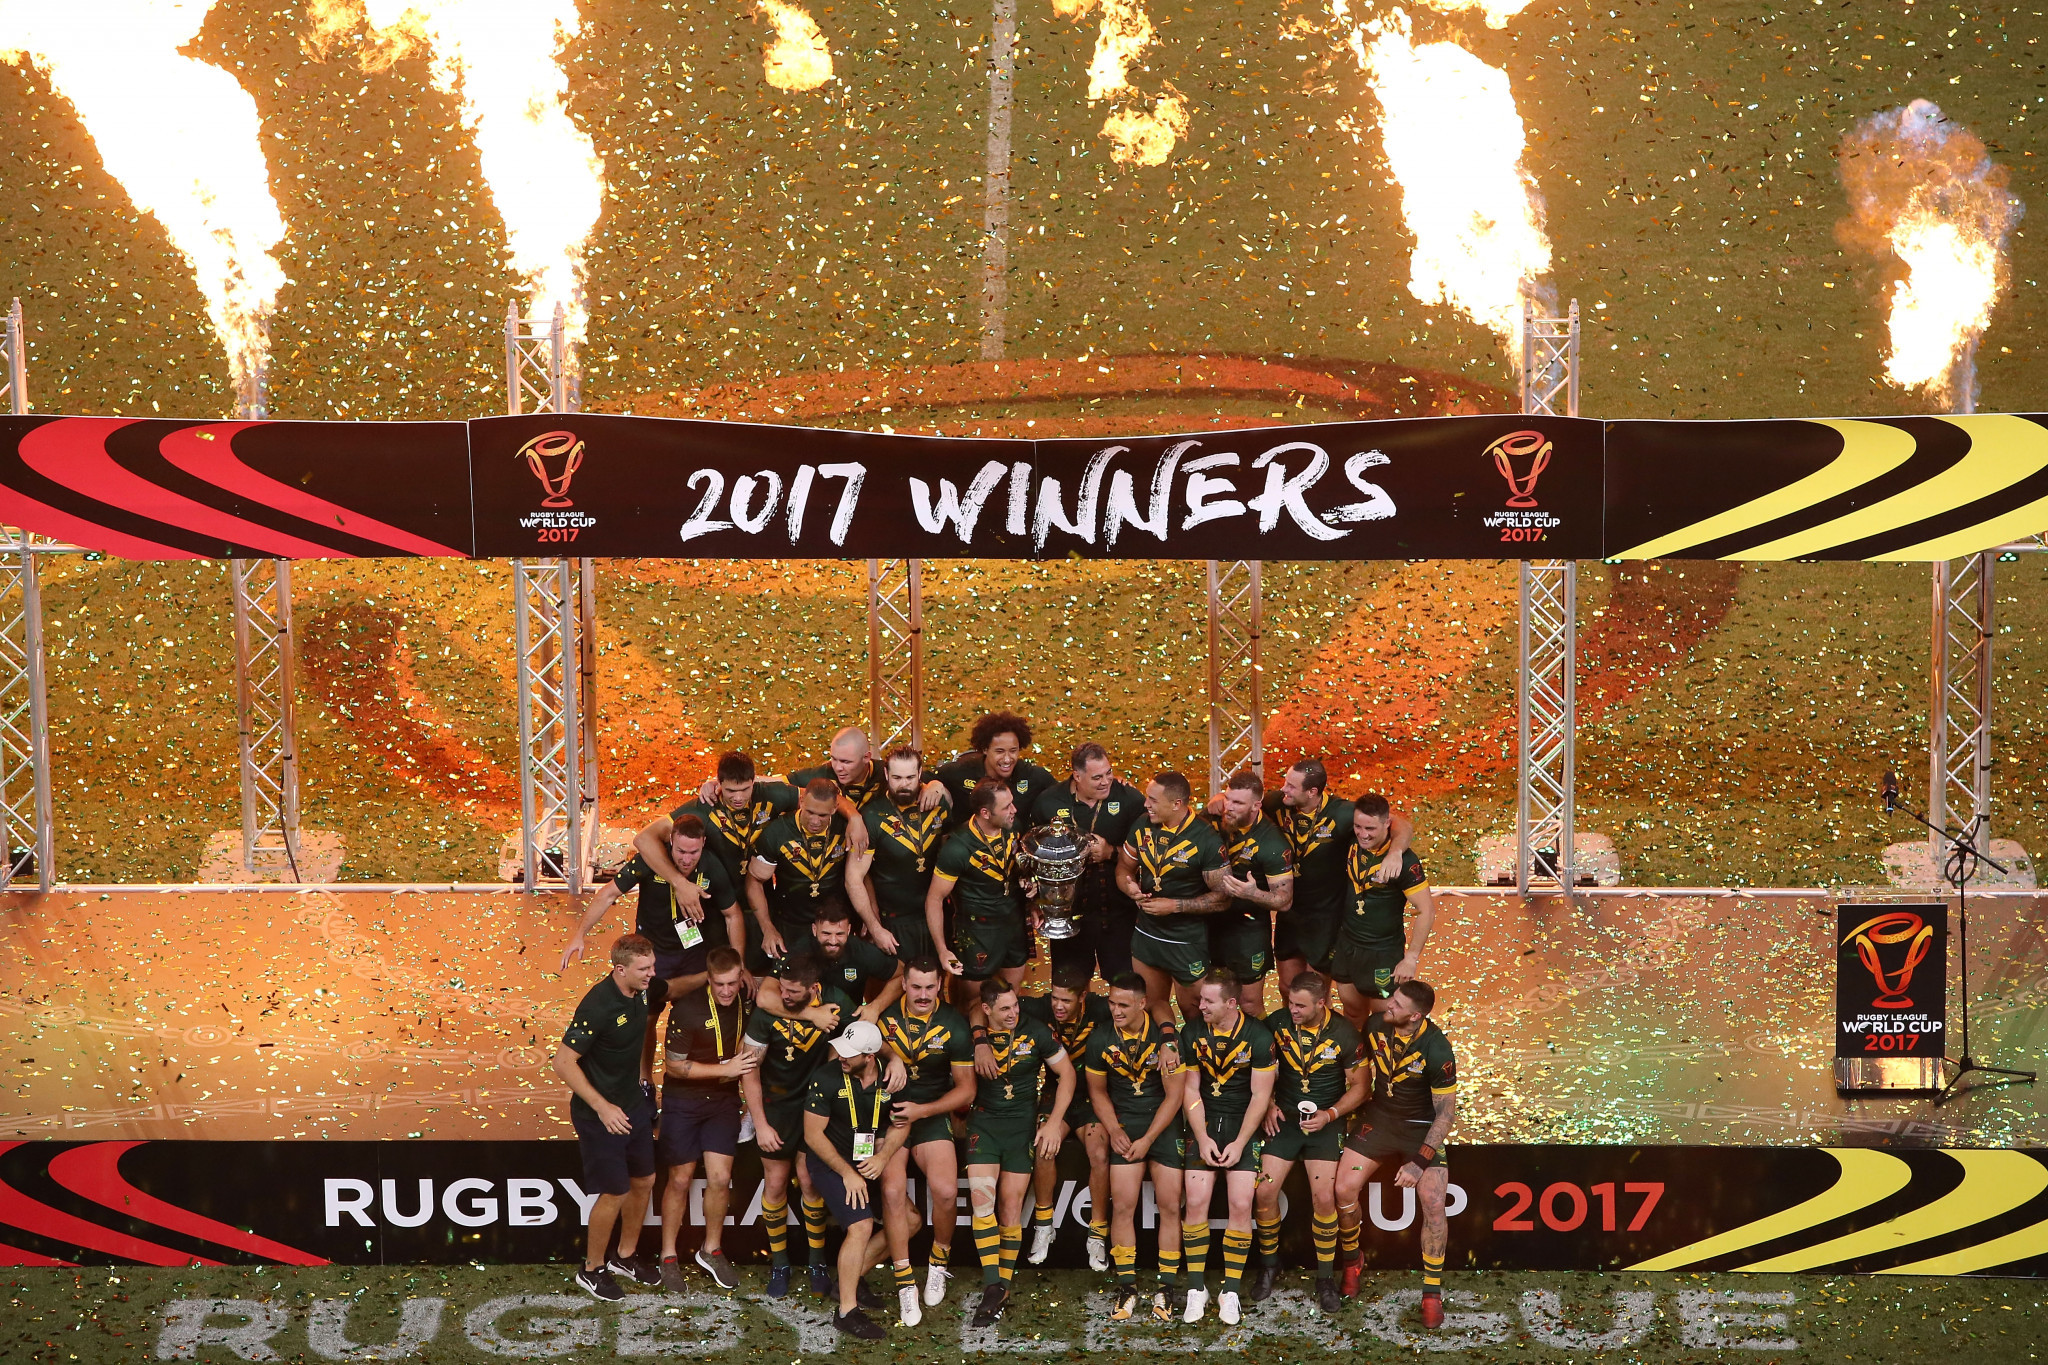 Rugby League World Cup given 2022 dates shortly before FIFA World Cup